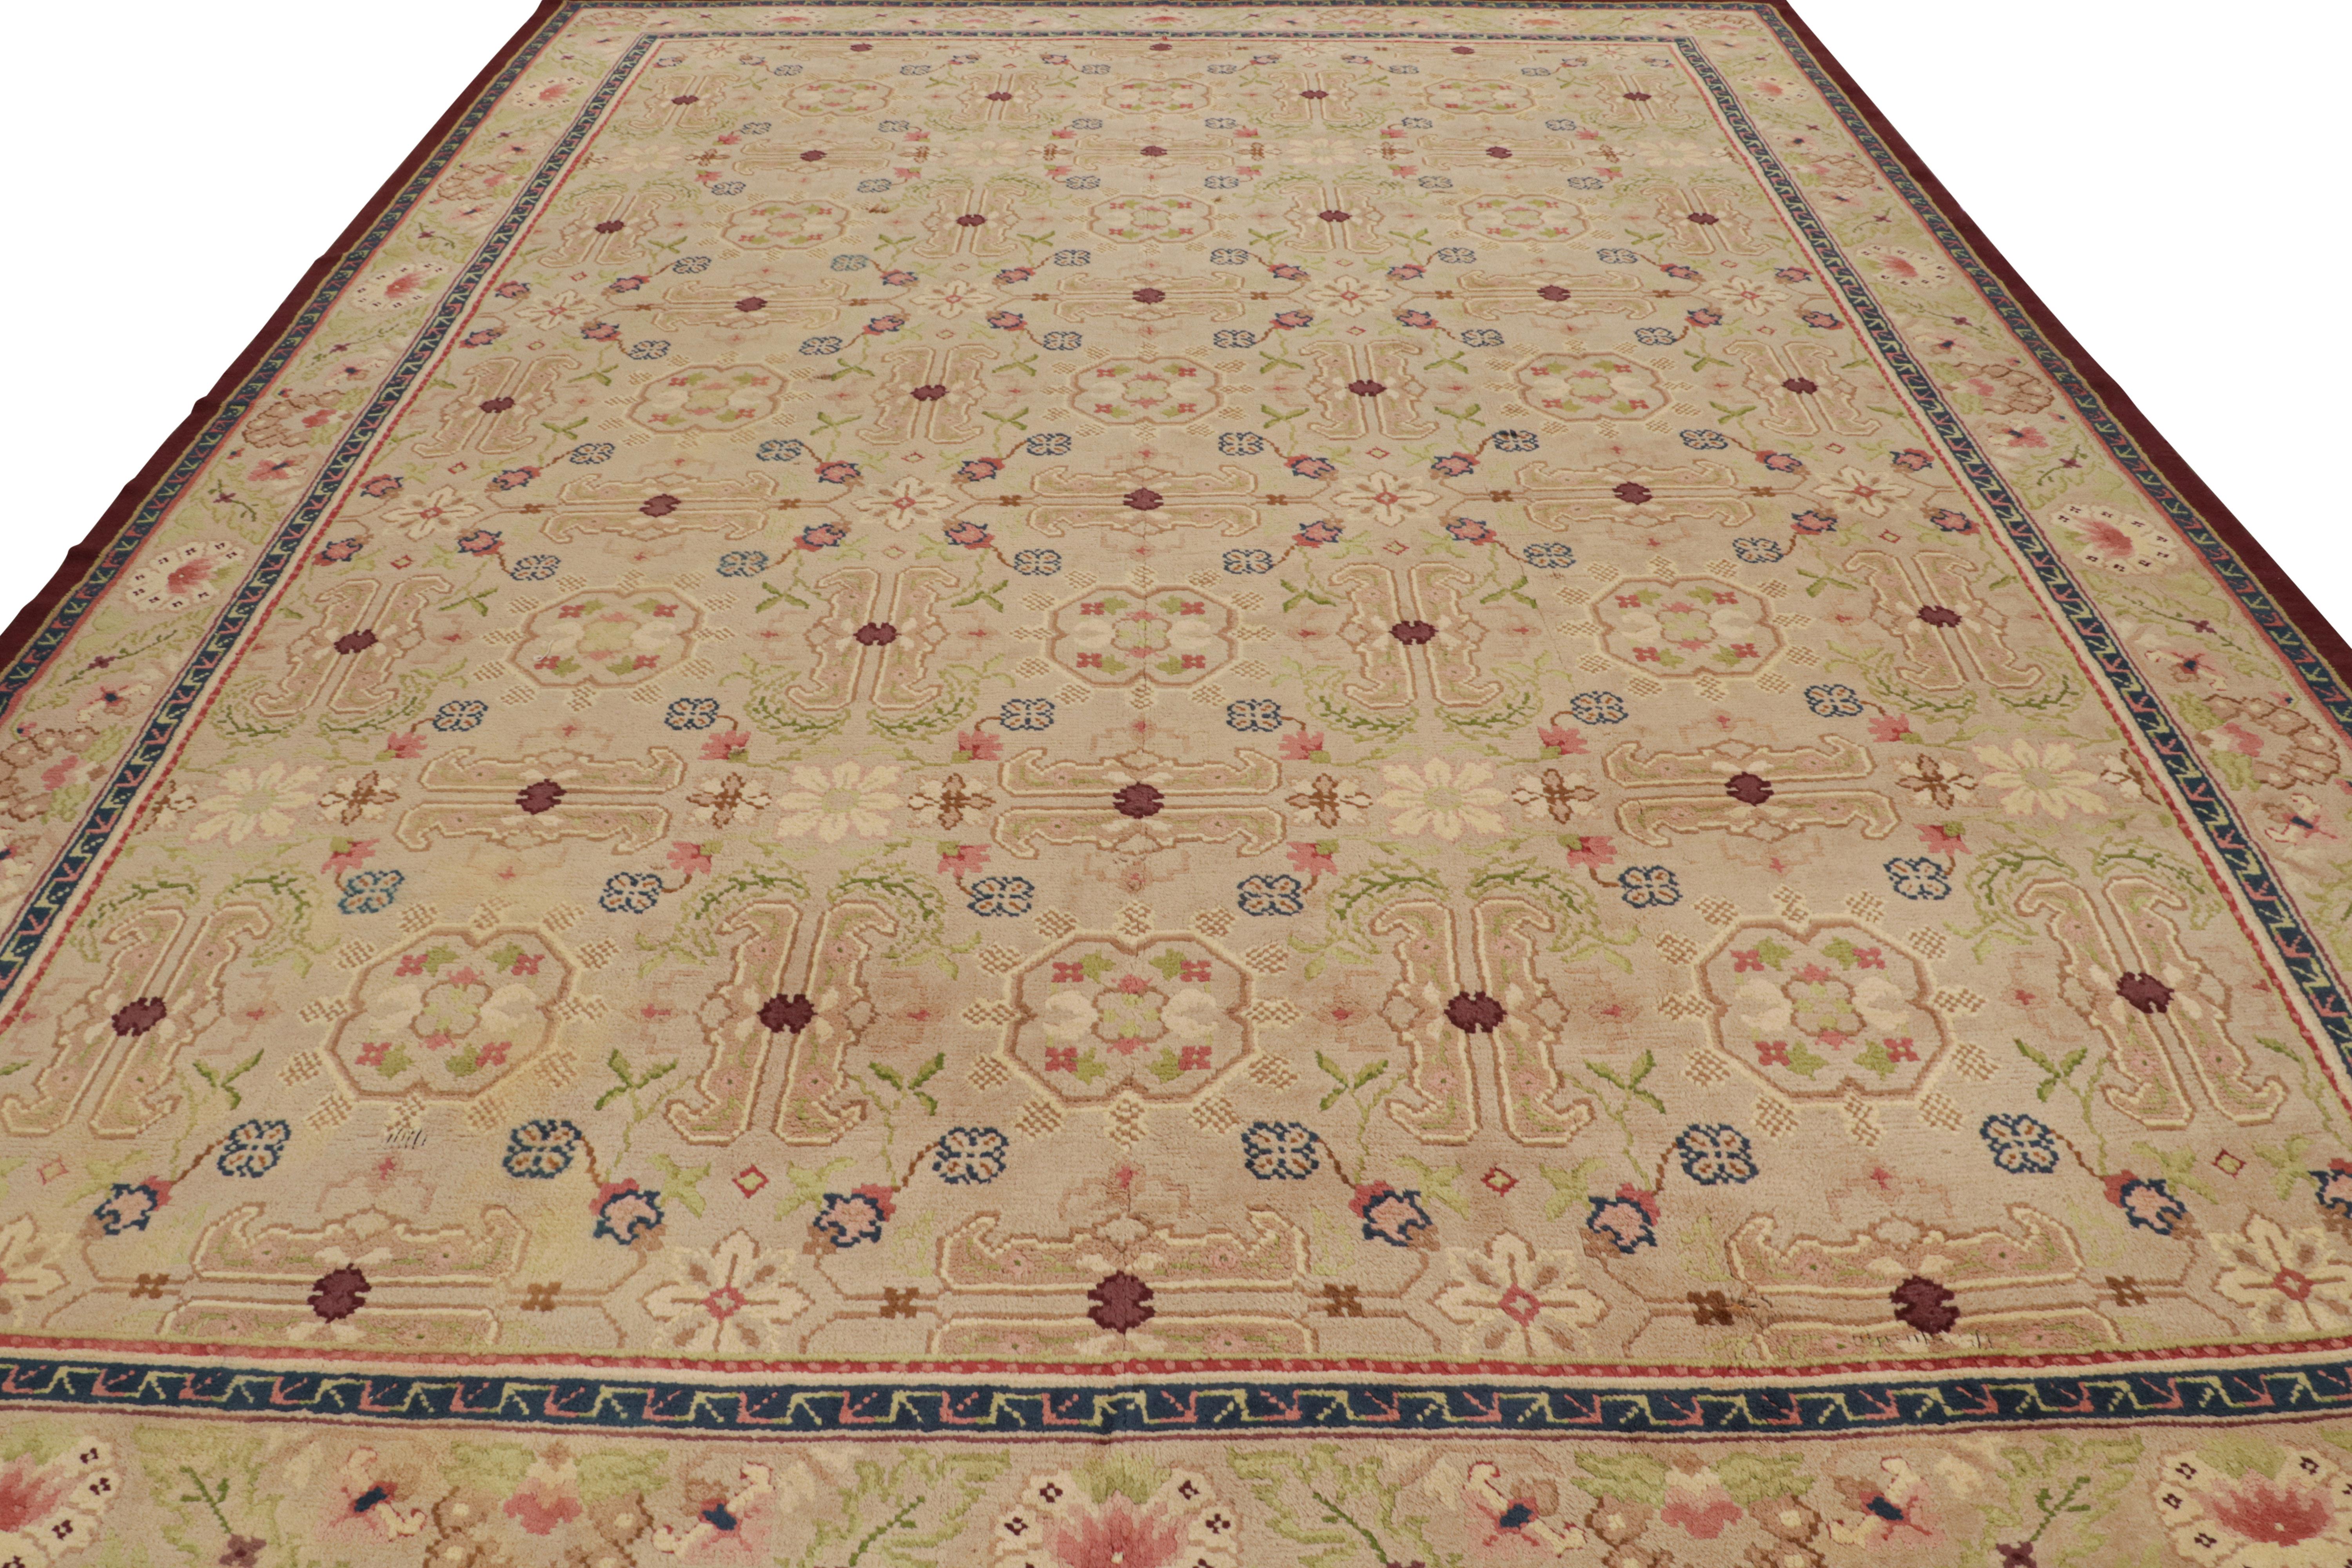 Spanish Oversized Antique Savonnerie Rug in Brown with Floral Patterns, from Rug & Kilim For Sale